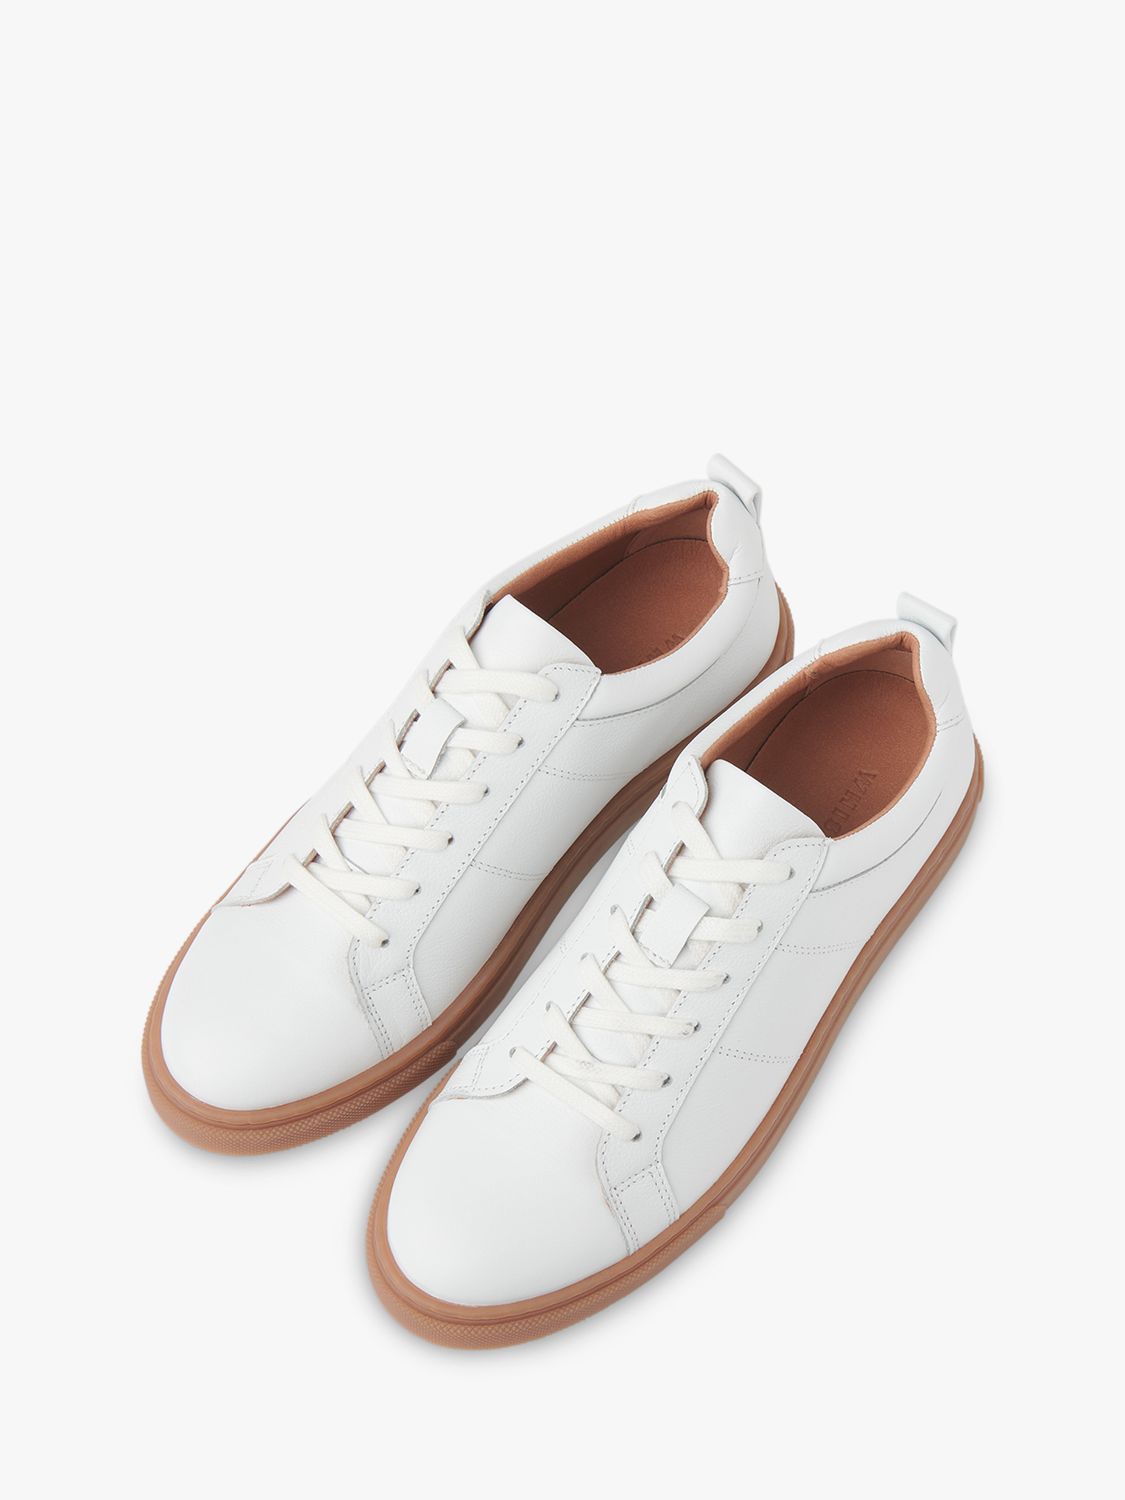 Buy Whistles Koki Leather Gum Sole Trainers, White/Multi Online at johnlewis.com